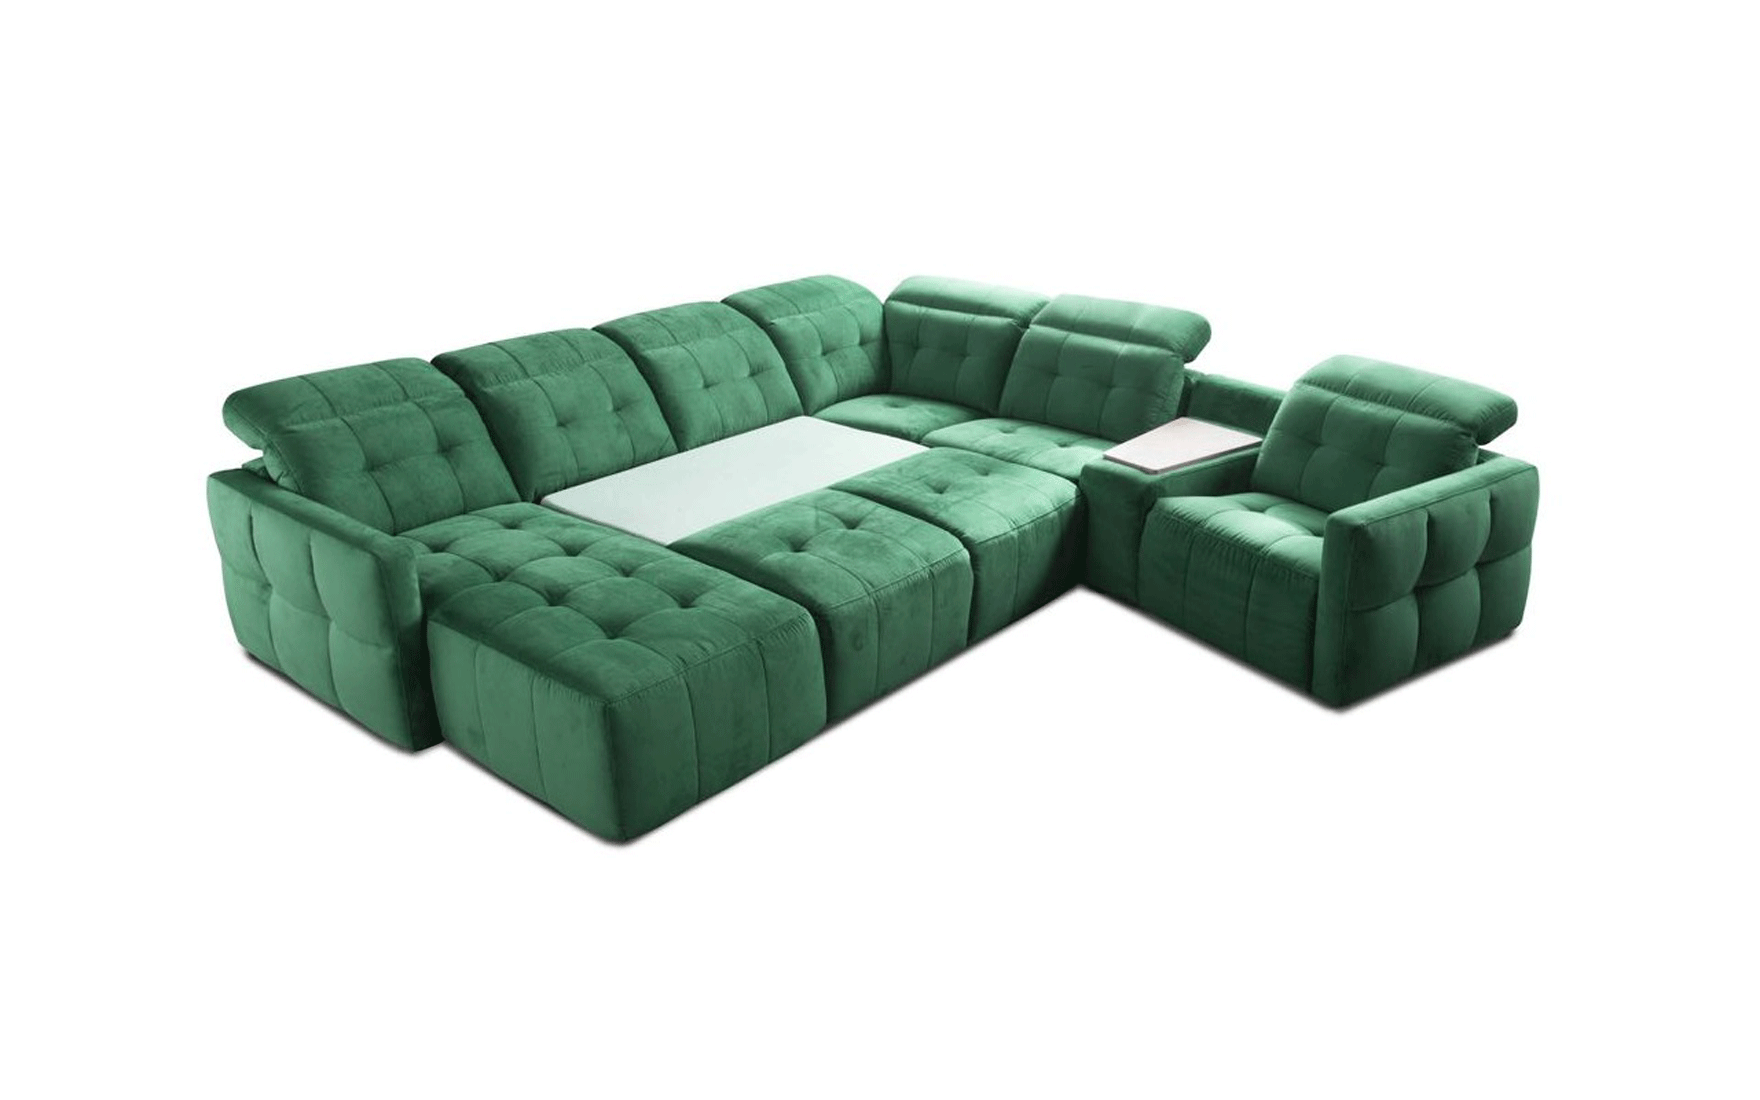 Extravagant Tufted Microfiber Sectional Sofa with Pillows